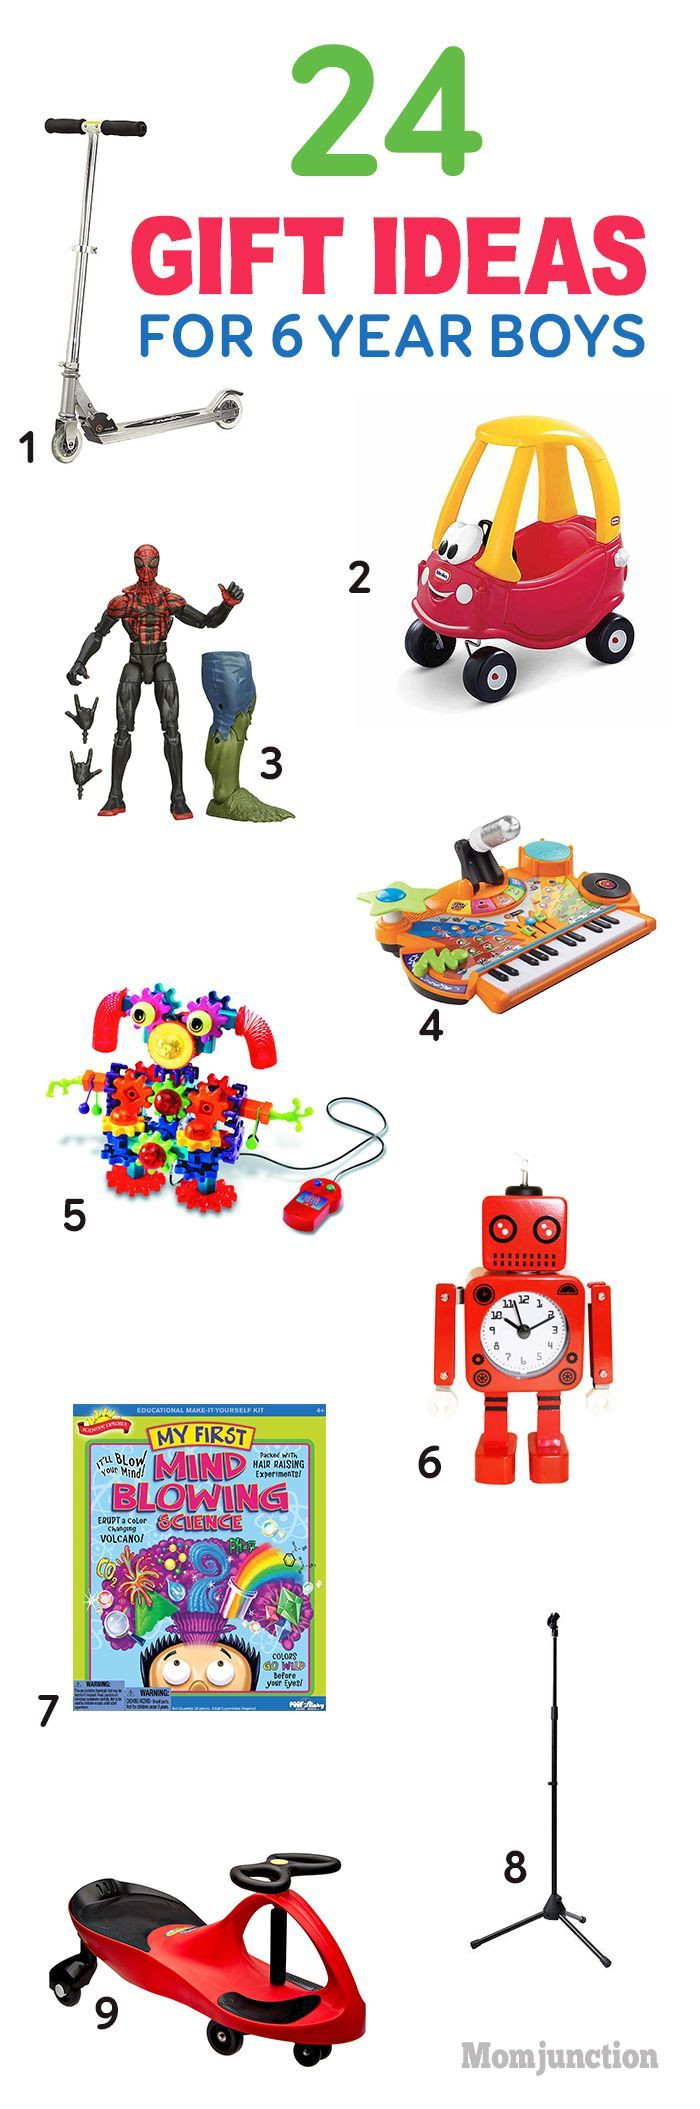 Gift Ideas For 7 Year Old Boys
 17 Best images about Toys for 7 year old boy on Pinterest